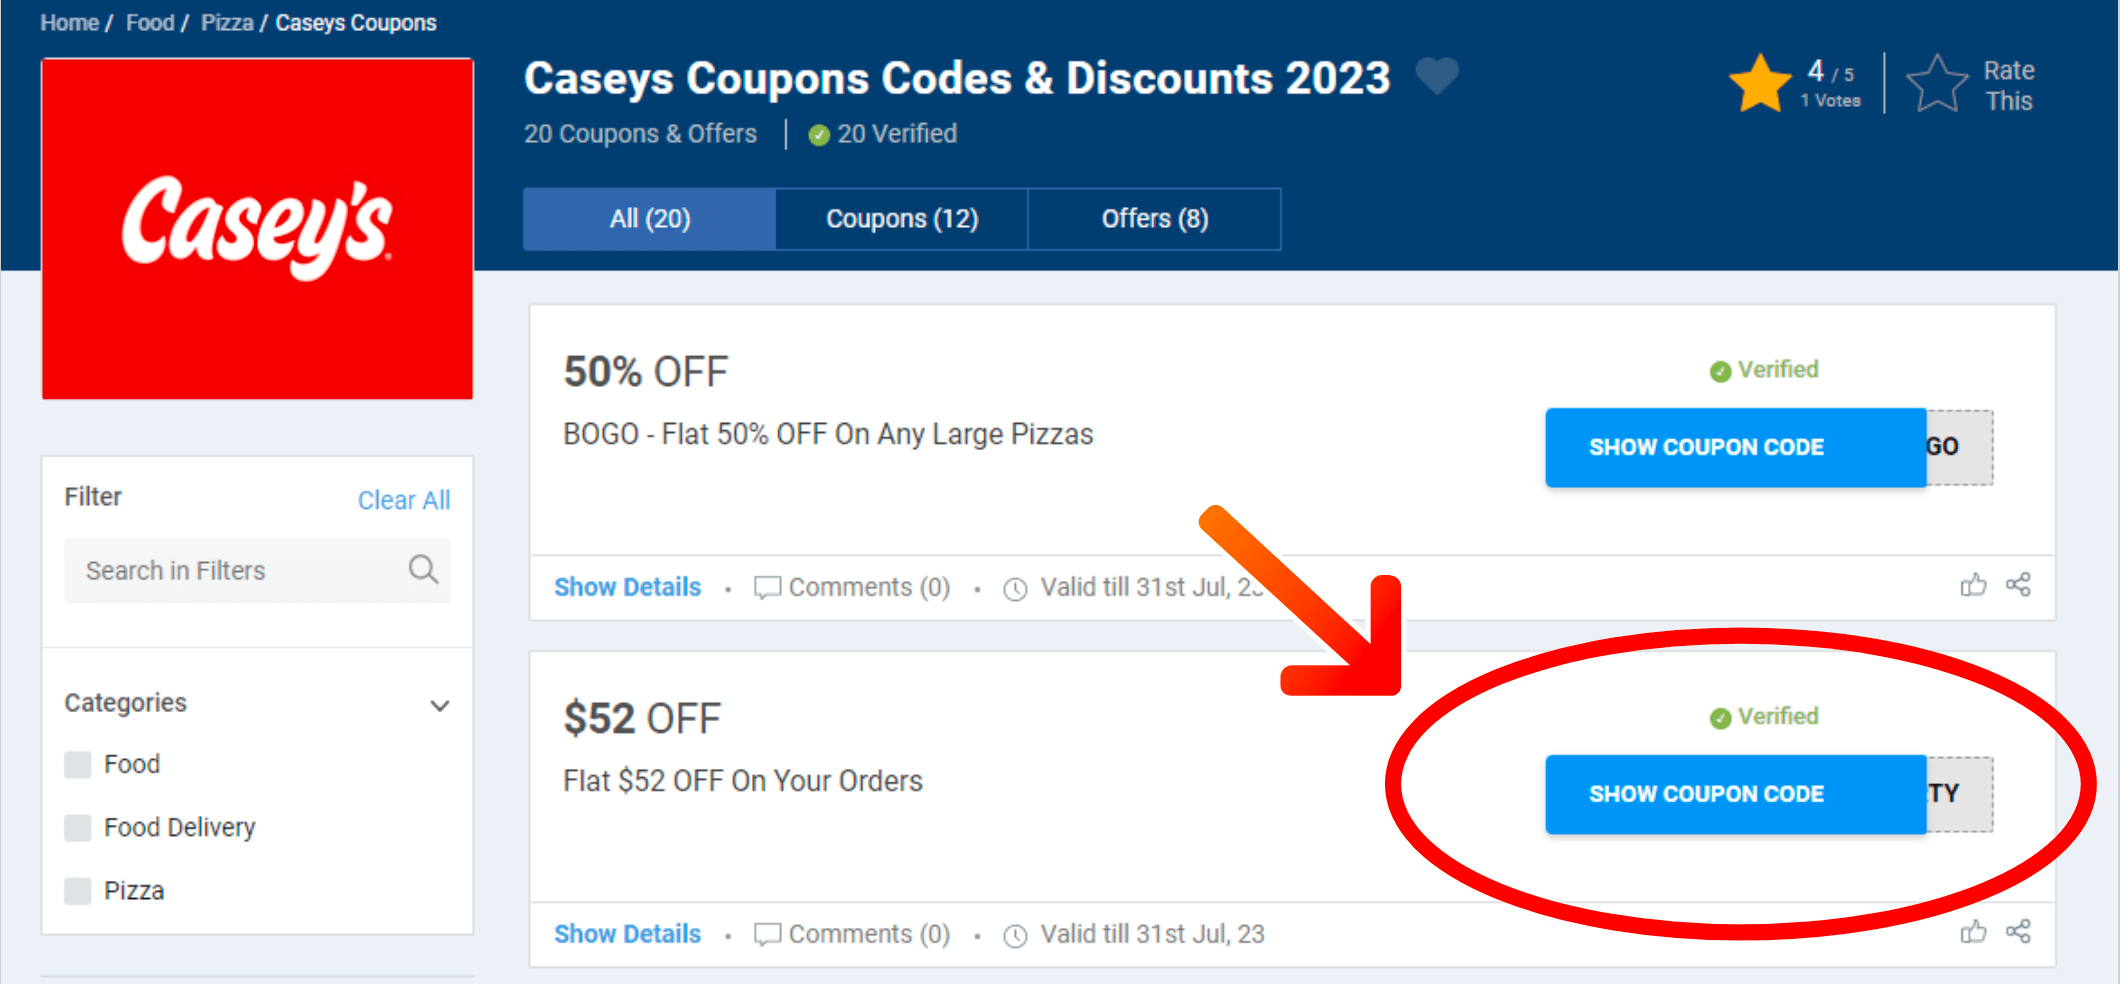 Casey's Pizza Coupon Codes & Deals FLAT 50 OFF